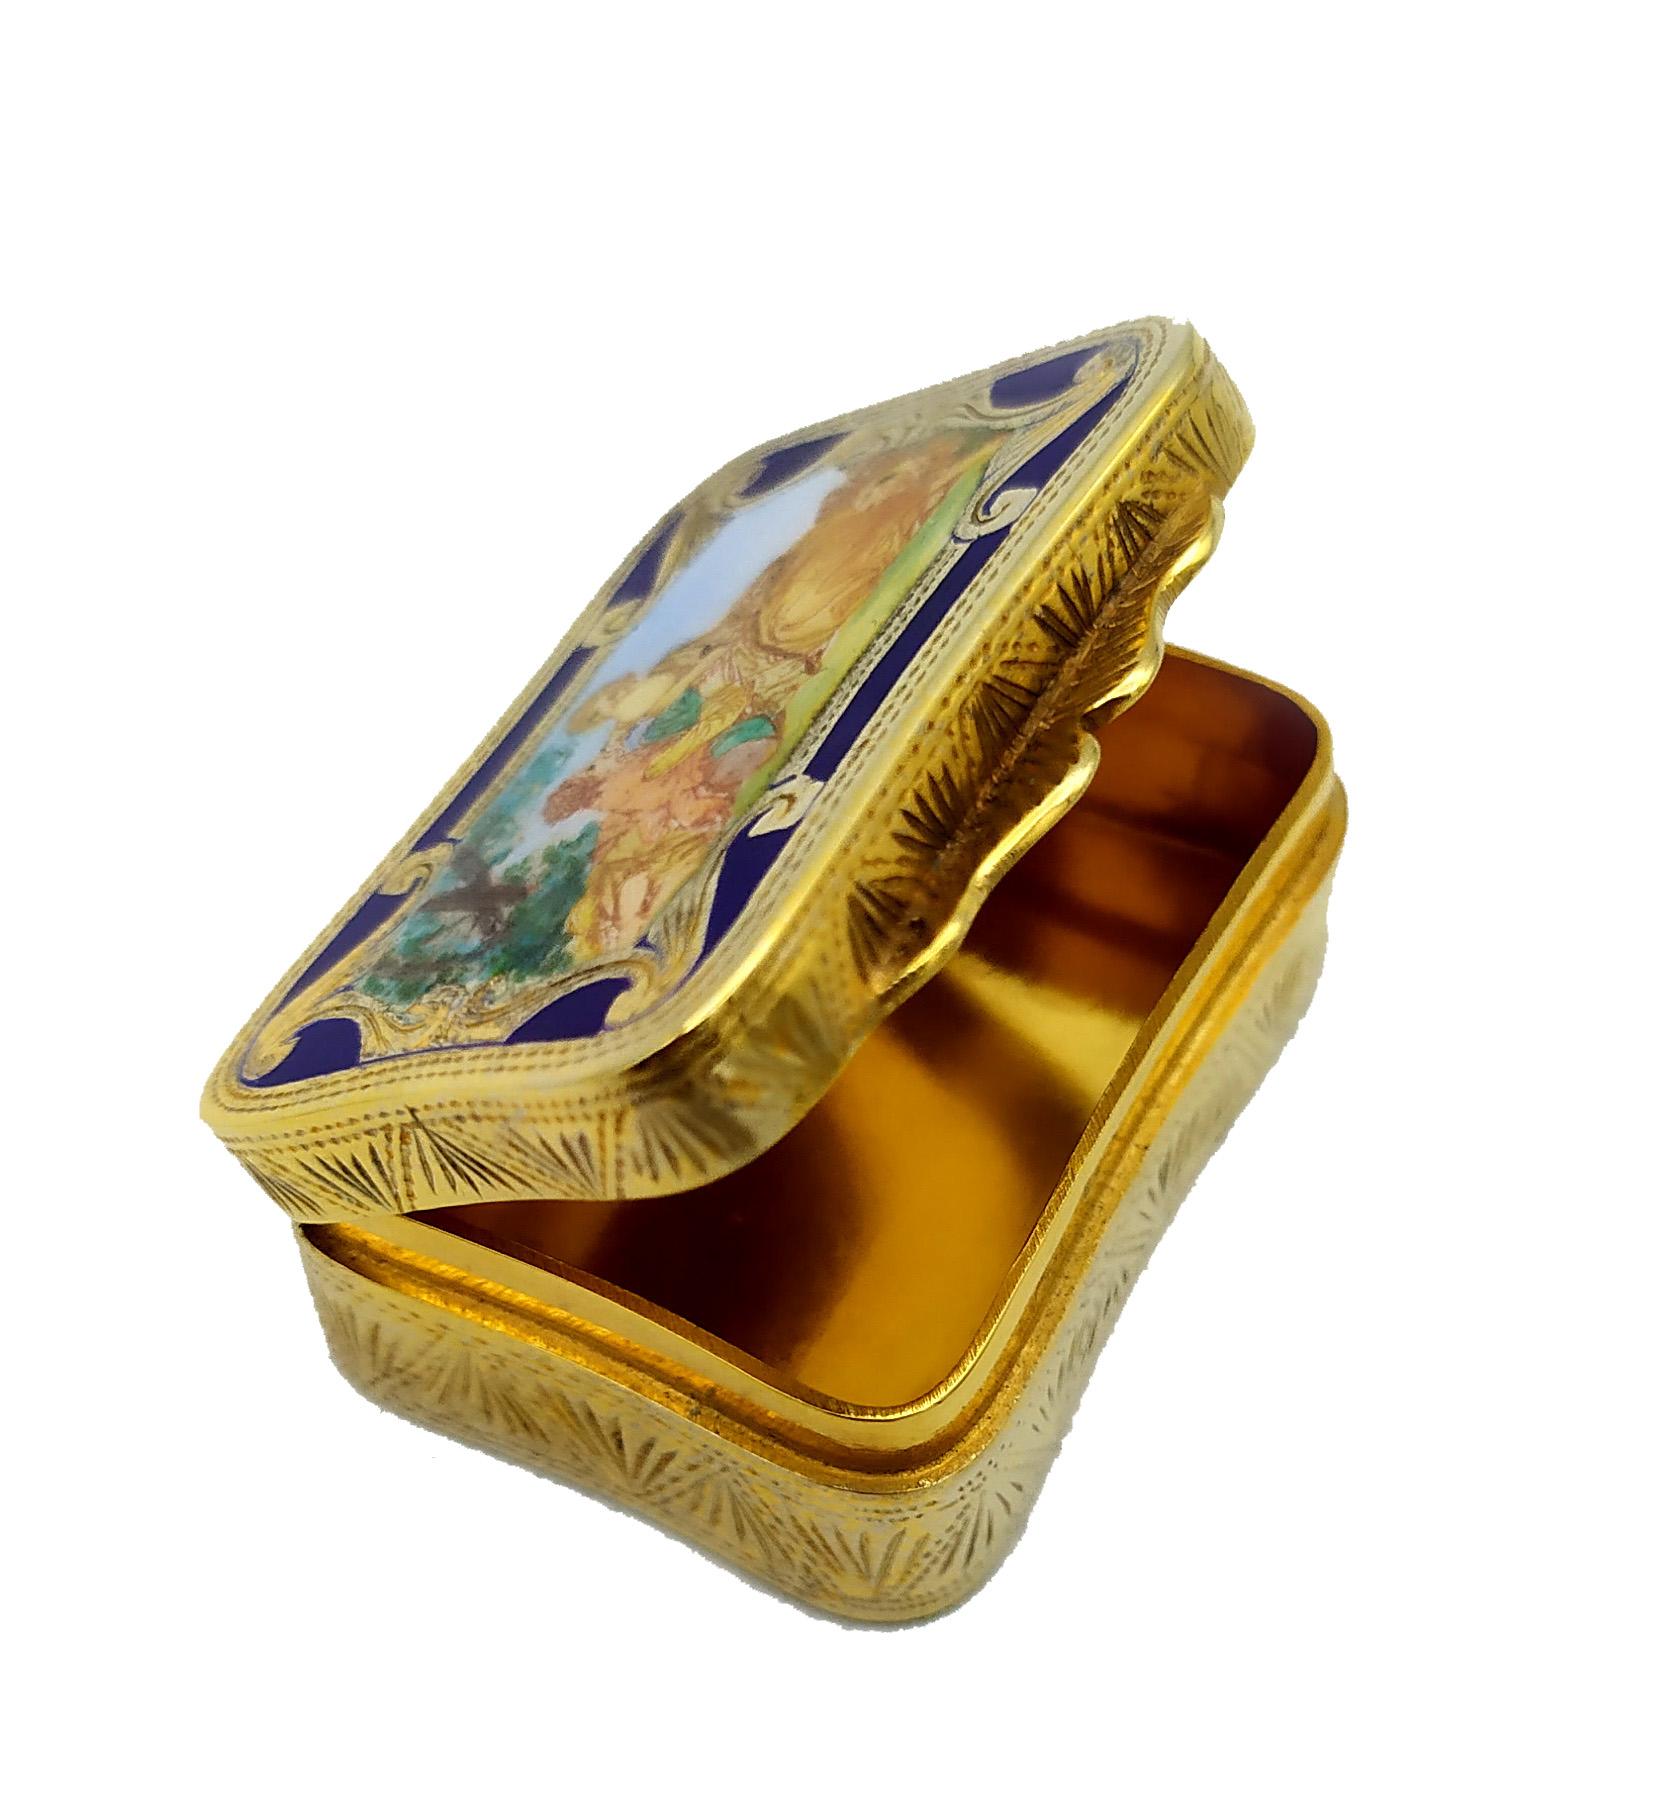 Pill Box fired Enamel Miniature Louis XVI style Sterling Silver Salimbeni In Excellent Condition For Sale In Firenze, FI